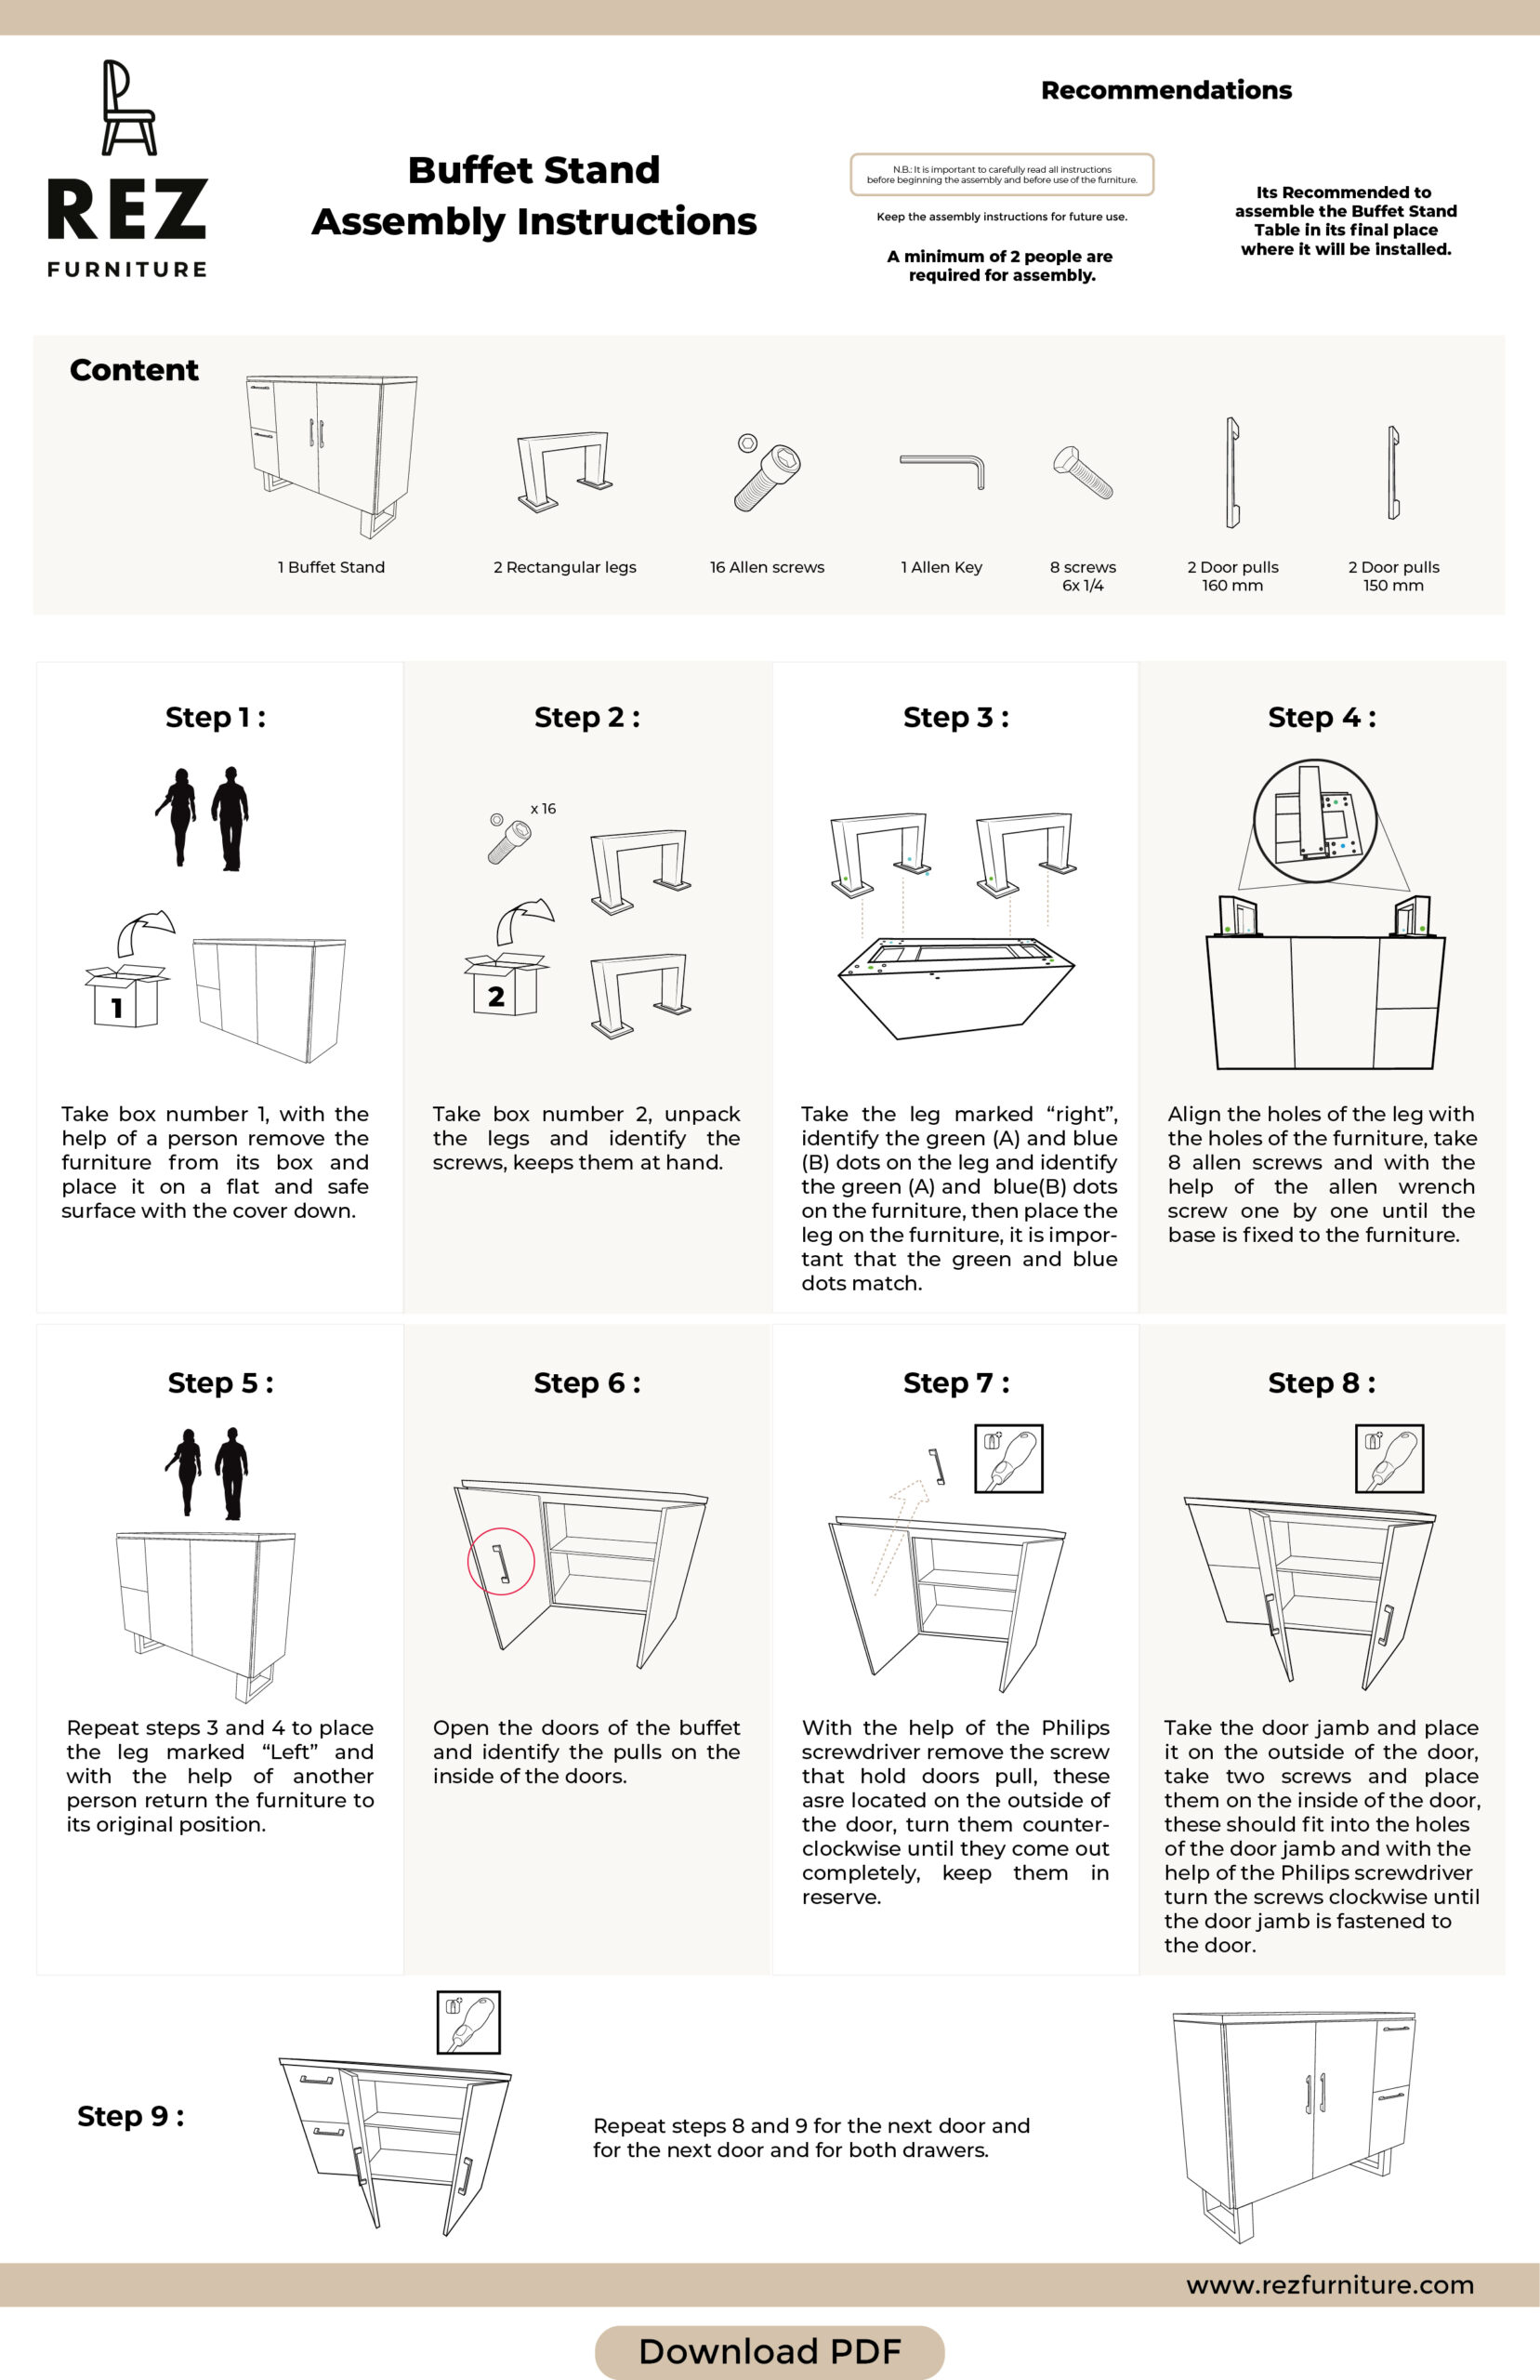 Assembly Instructions